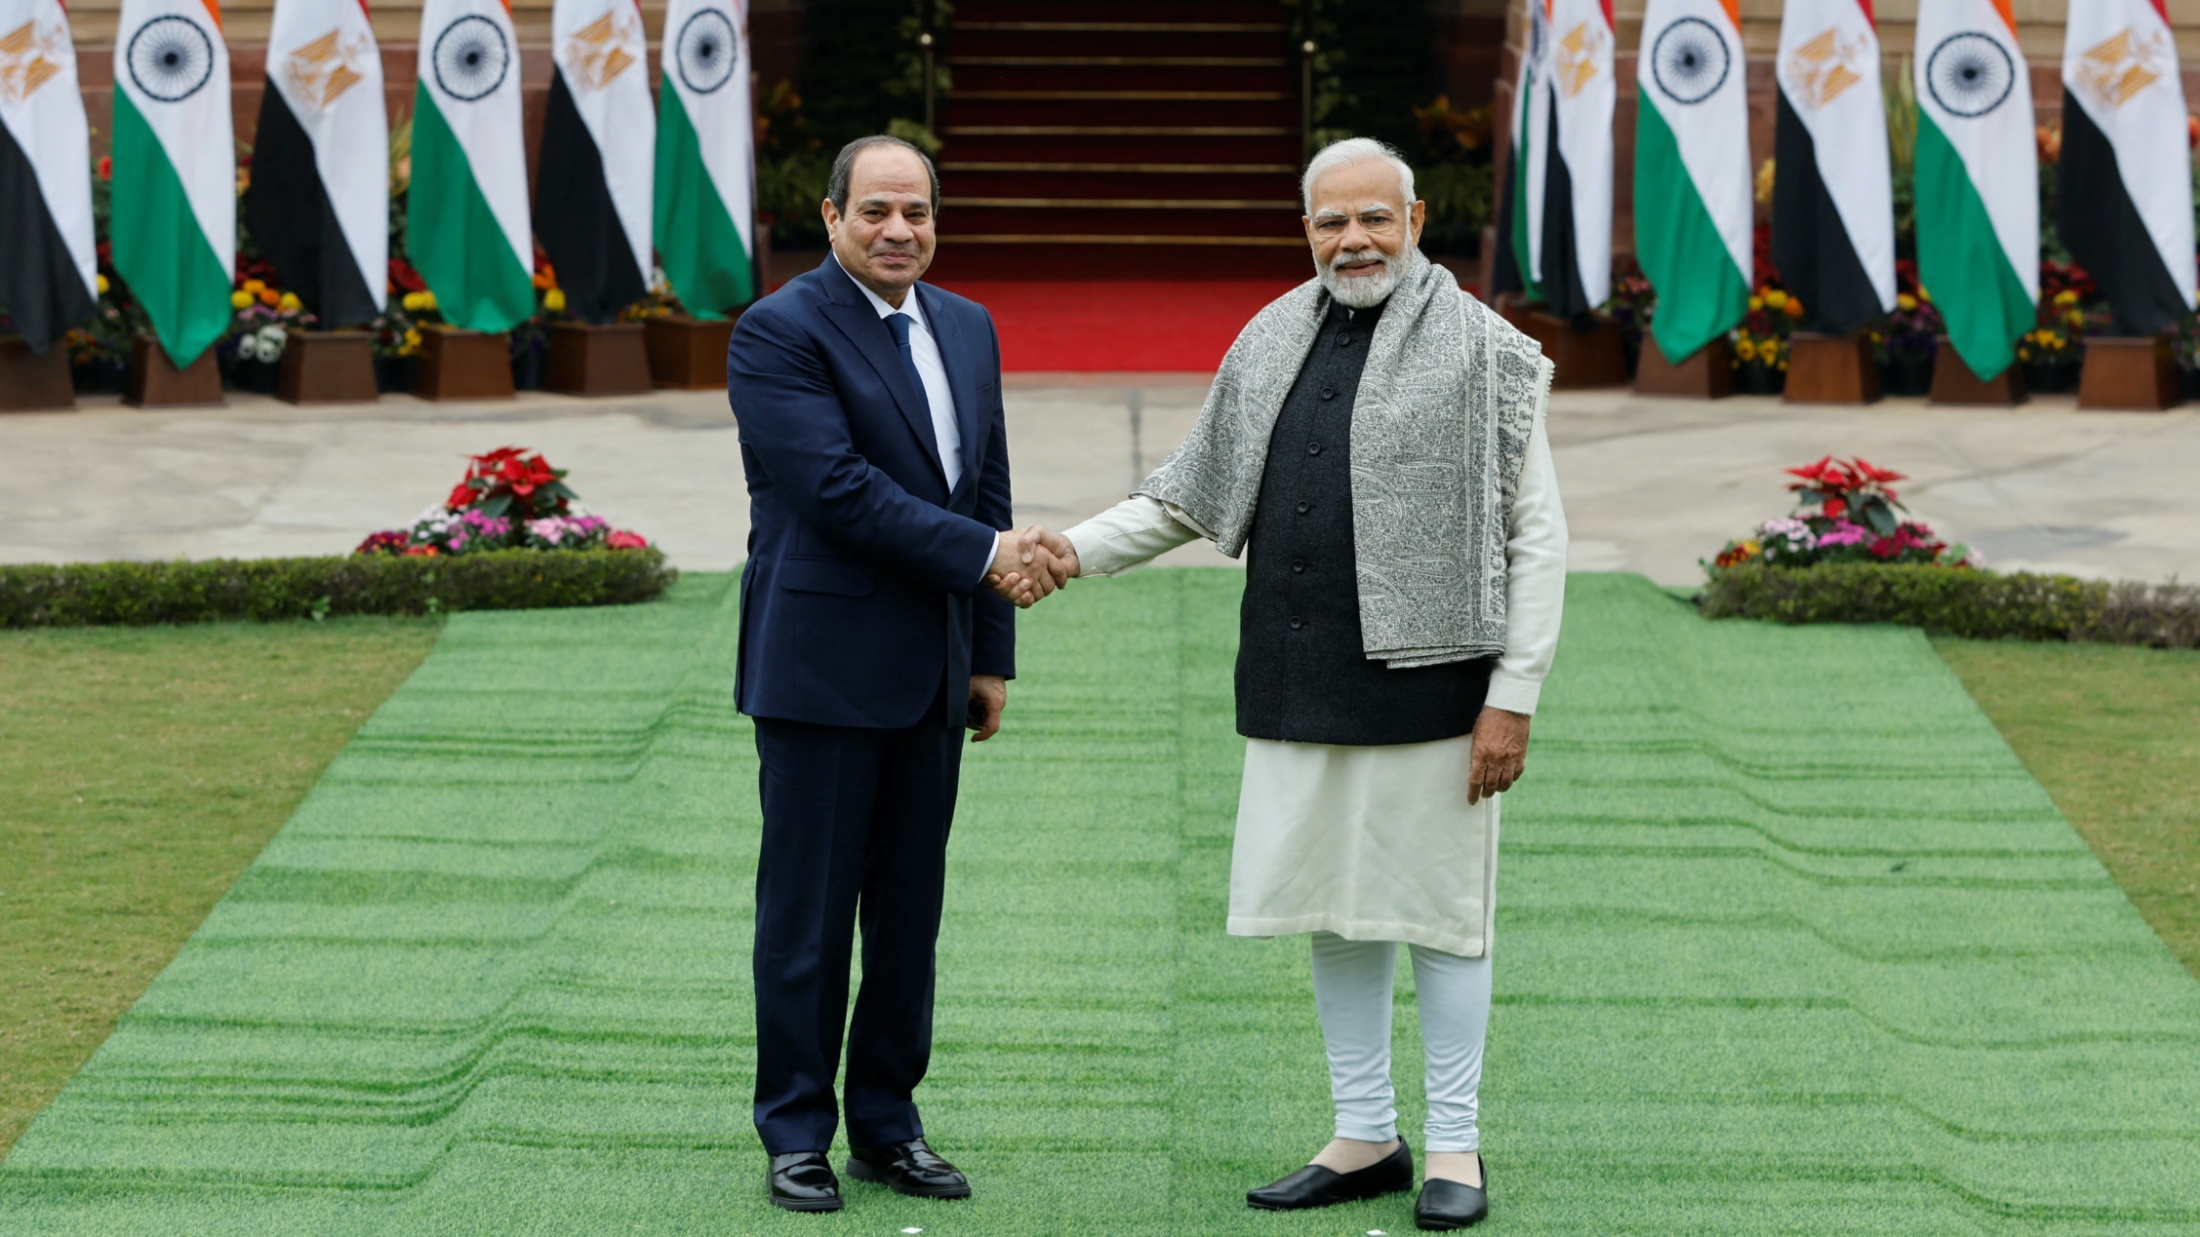 Egyptian President Abdel Fattah el-Sisi shakes hands with Indian Prime Minister Narendra Modi before their meeting at the Hyderabad House in New Delhi, 25 January 2023 (Reuters)